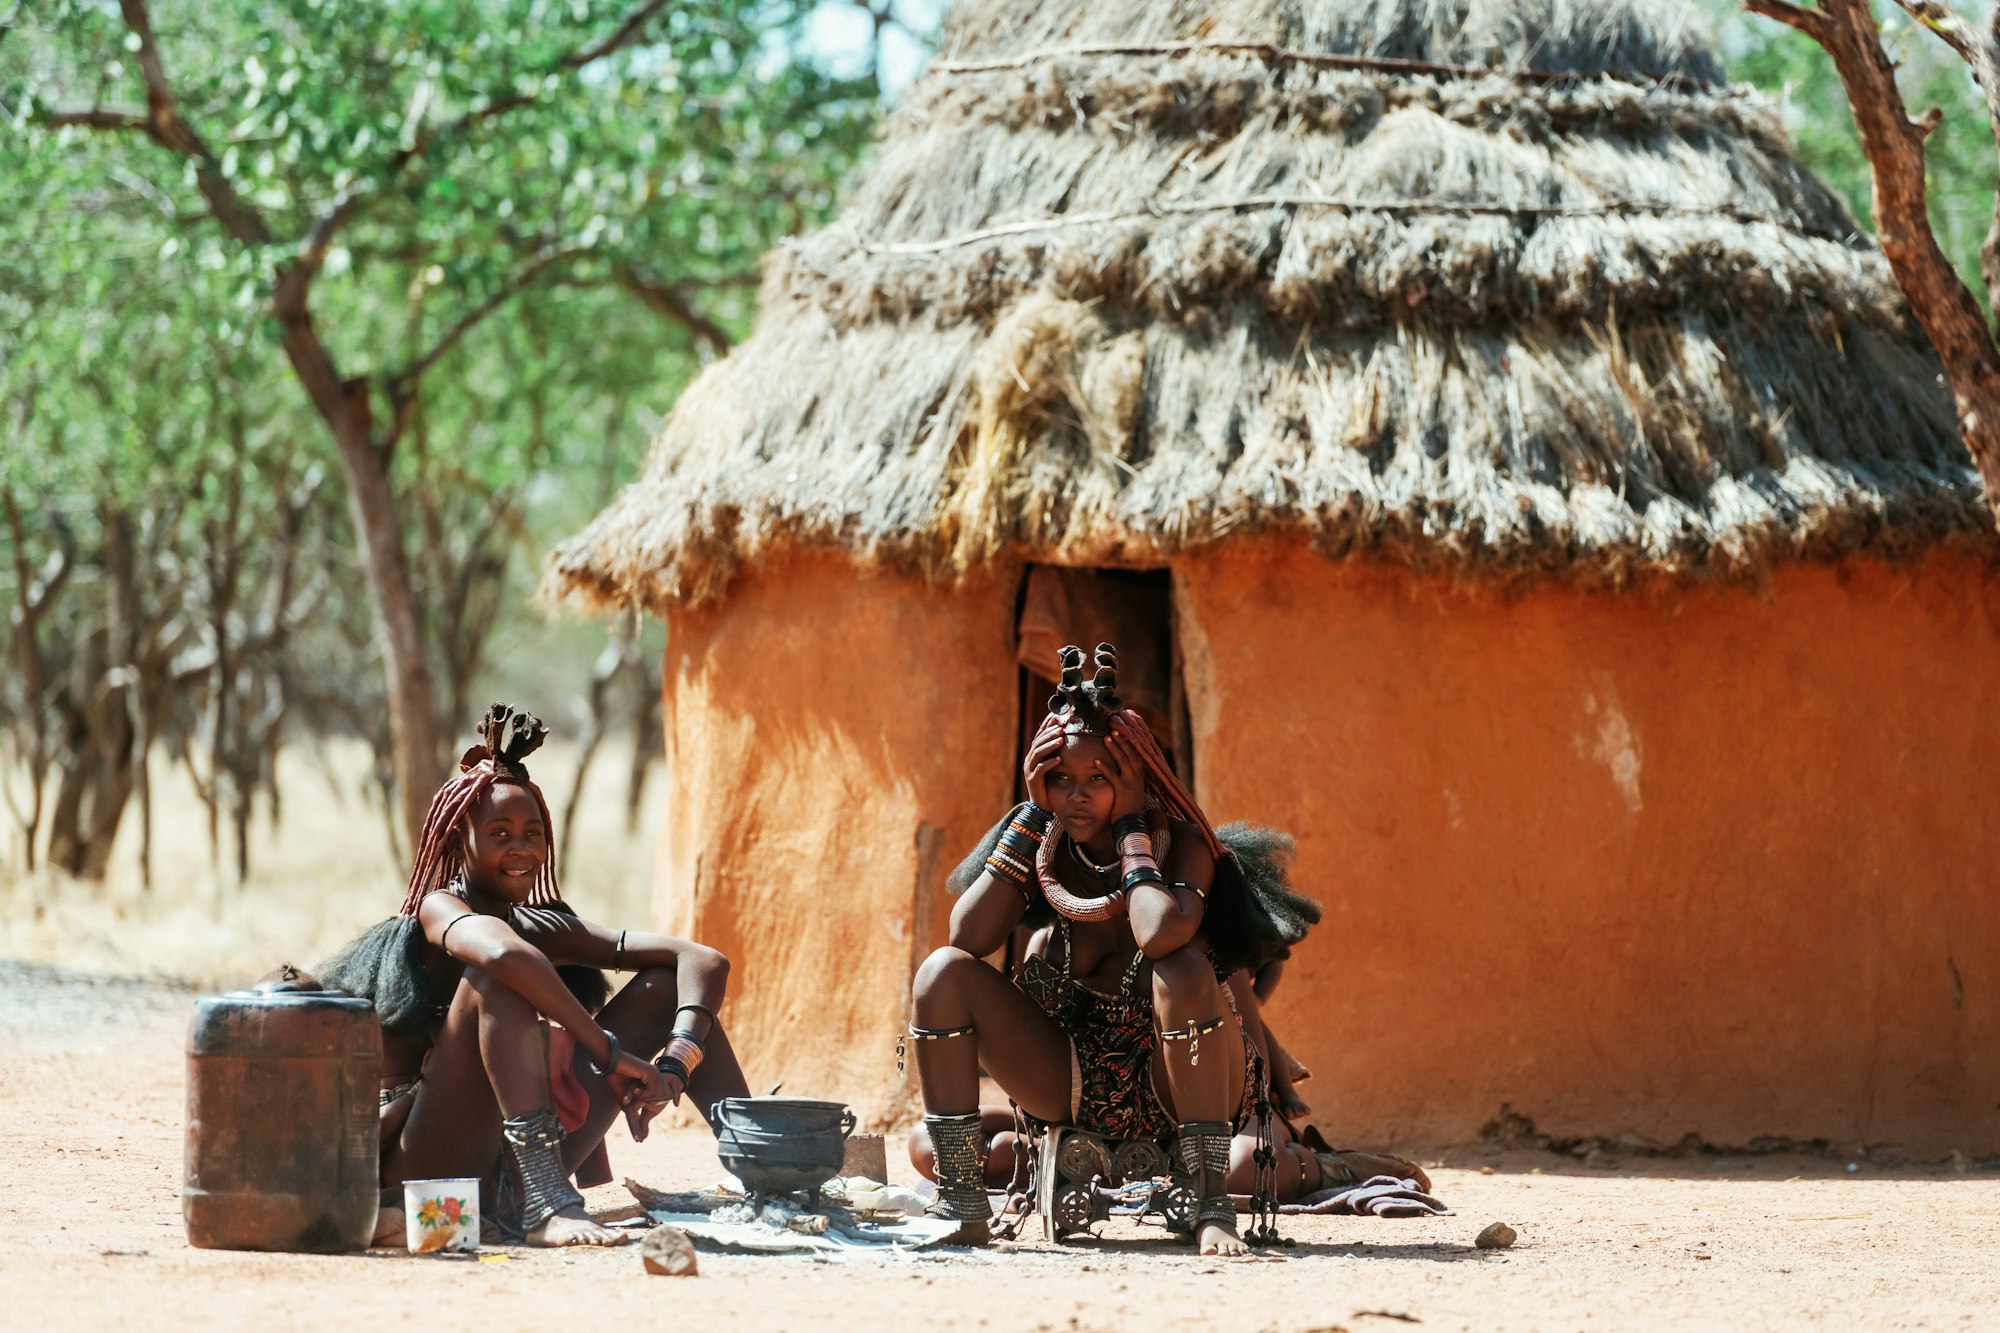 Namibia, Africa - June 14, 2021: Ethnic people, women are together near old styled home